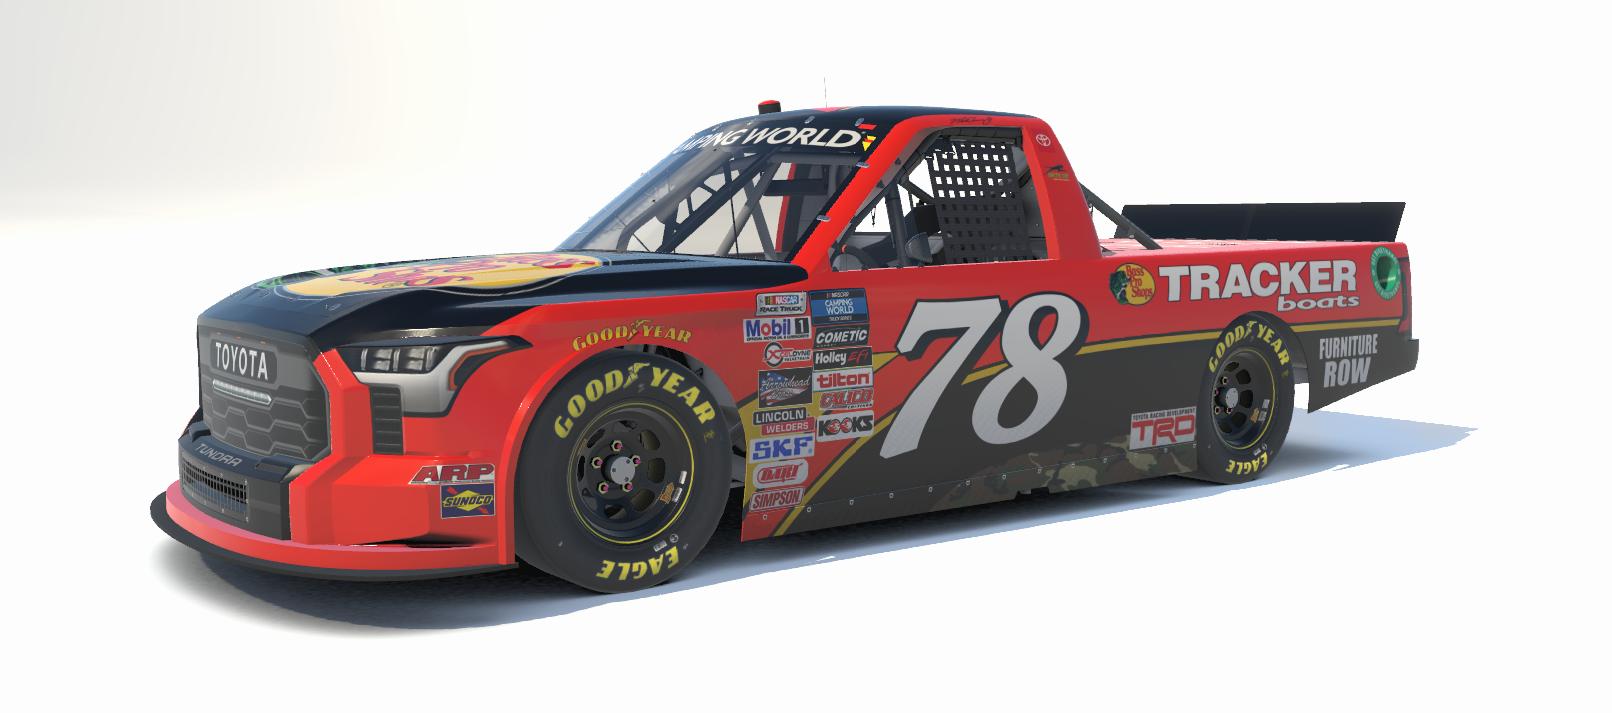 Preview of Martin Truex, Jr. 2016 Bass Pro Shops Toyota Tundra (No Number) by Will Bangs